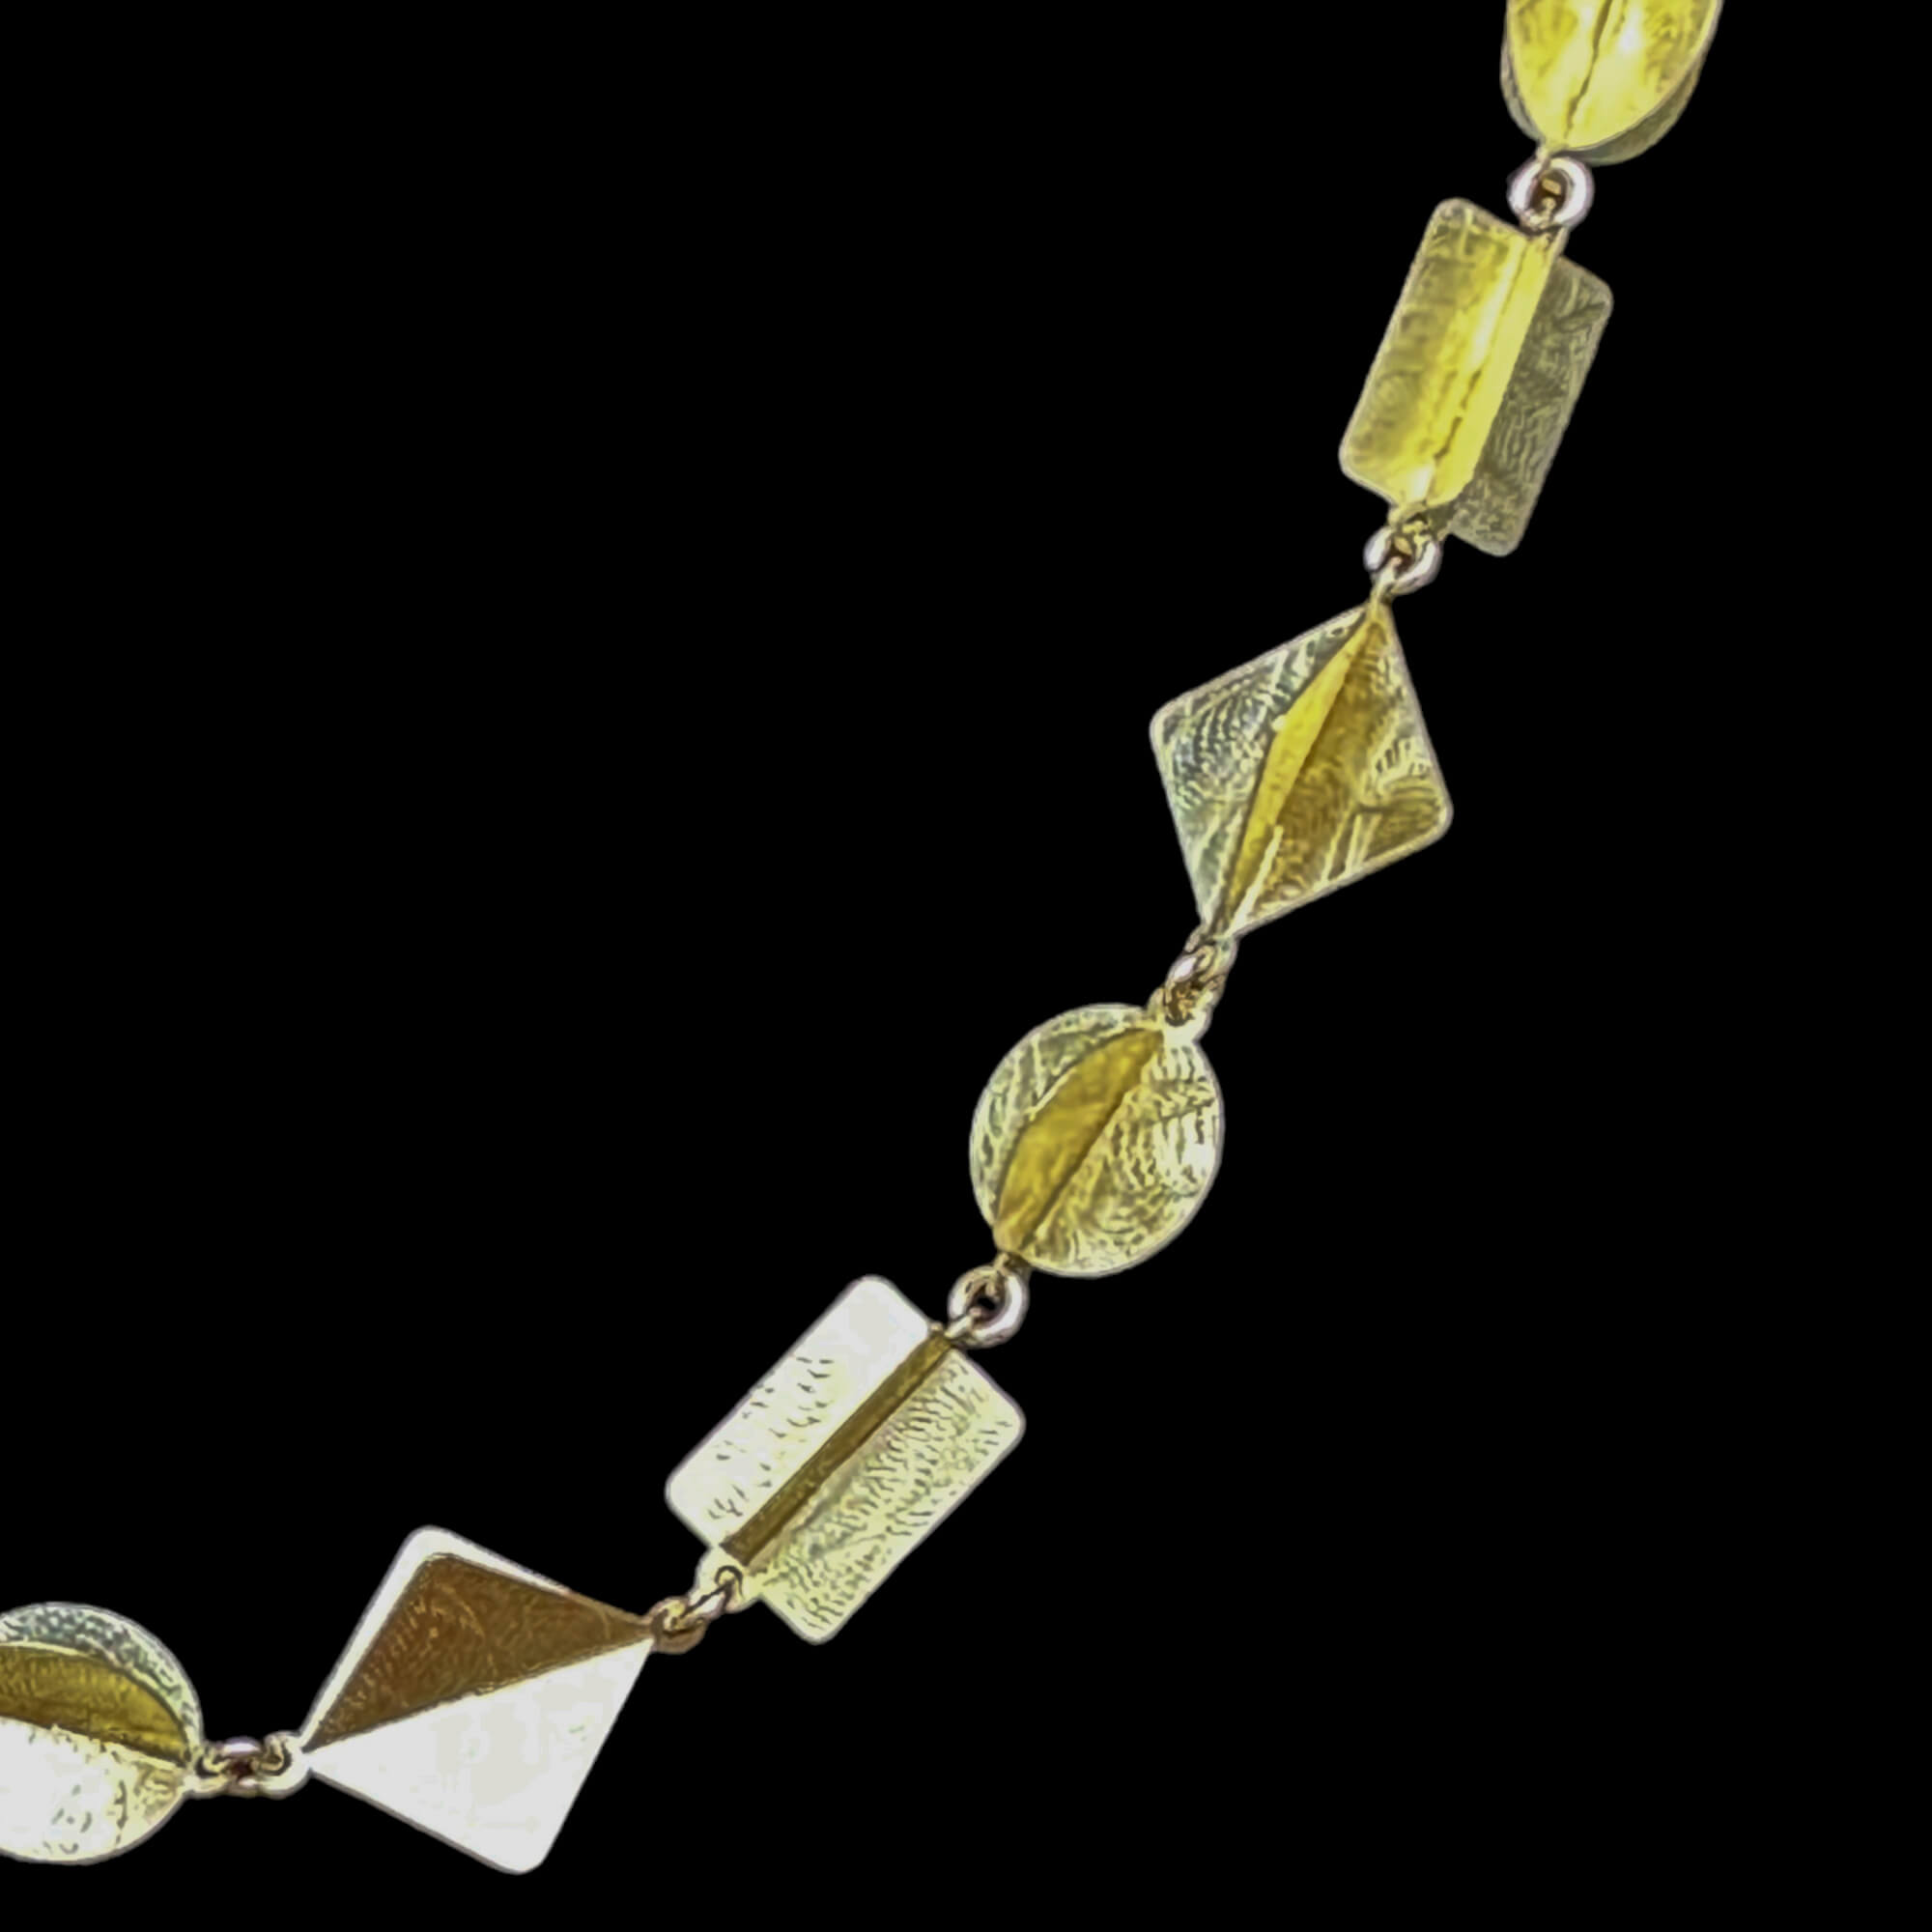 Multi-shaped necklace made of gold-plated silver